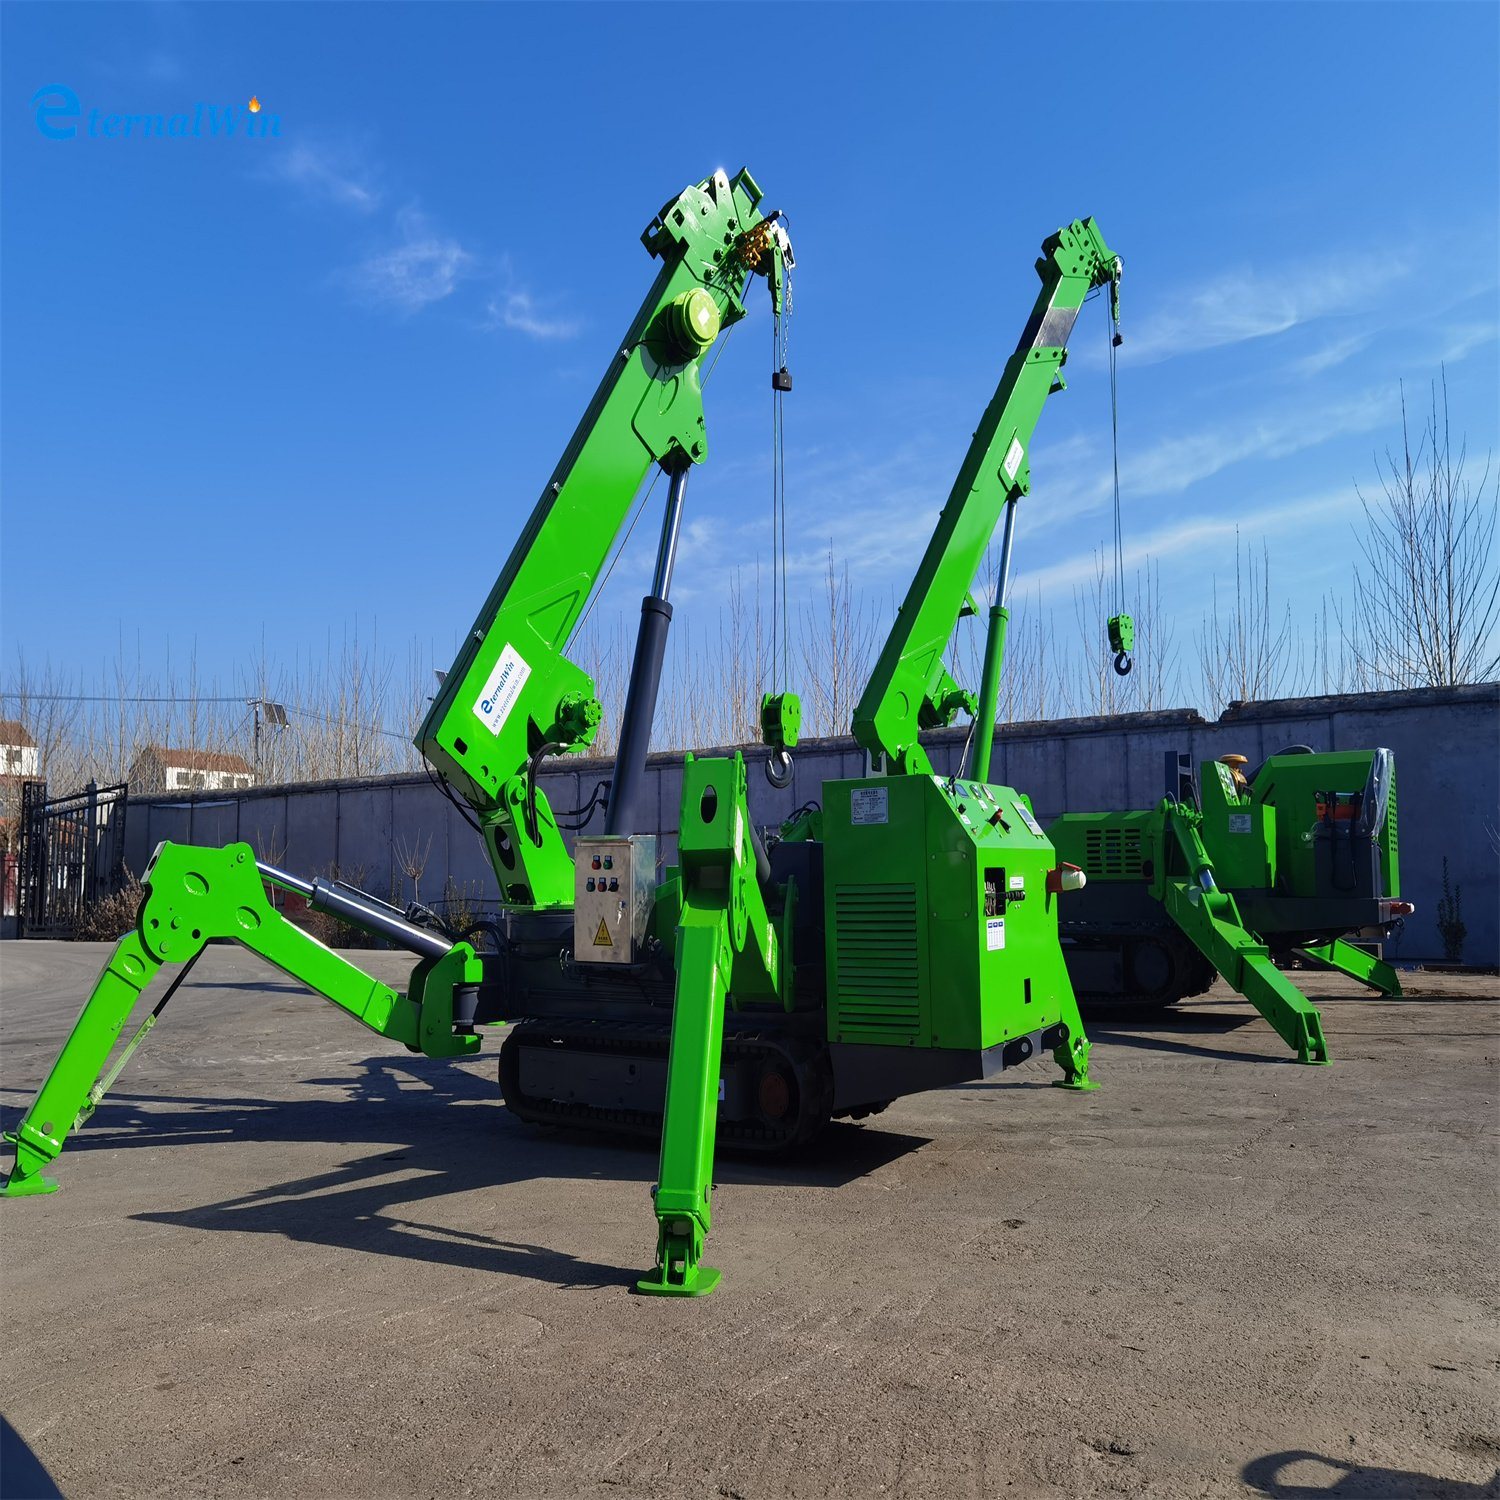 Eternalwin 3tons Hydraulic Lifting Equipment Spider Crane for USA Construction Works